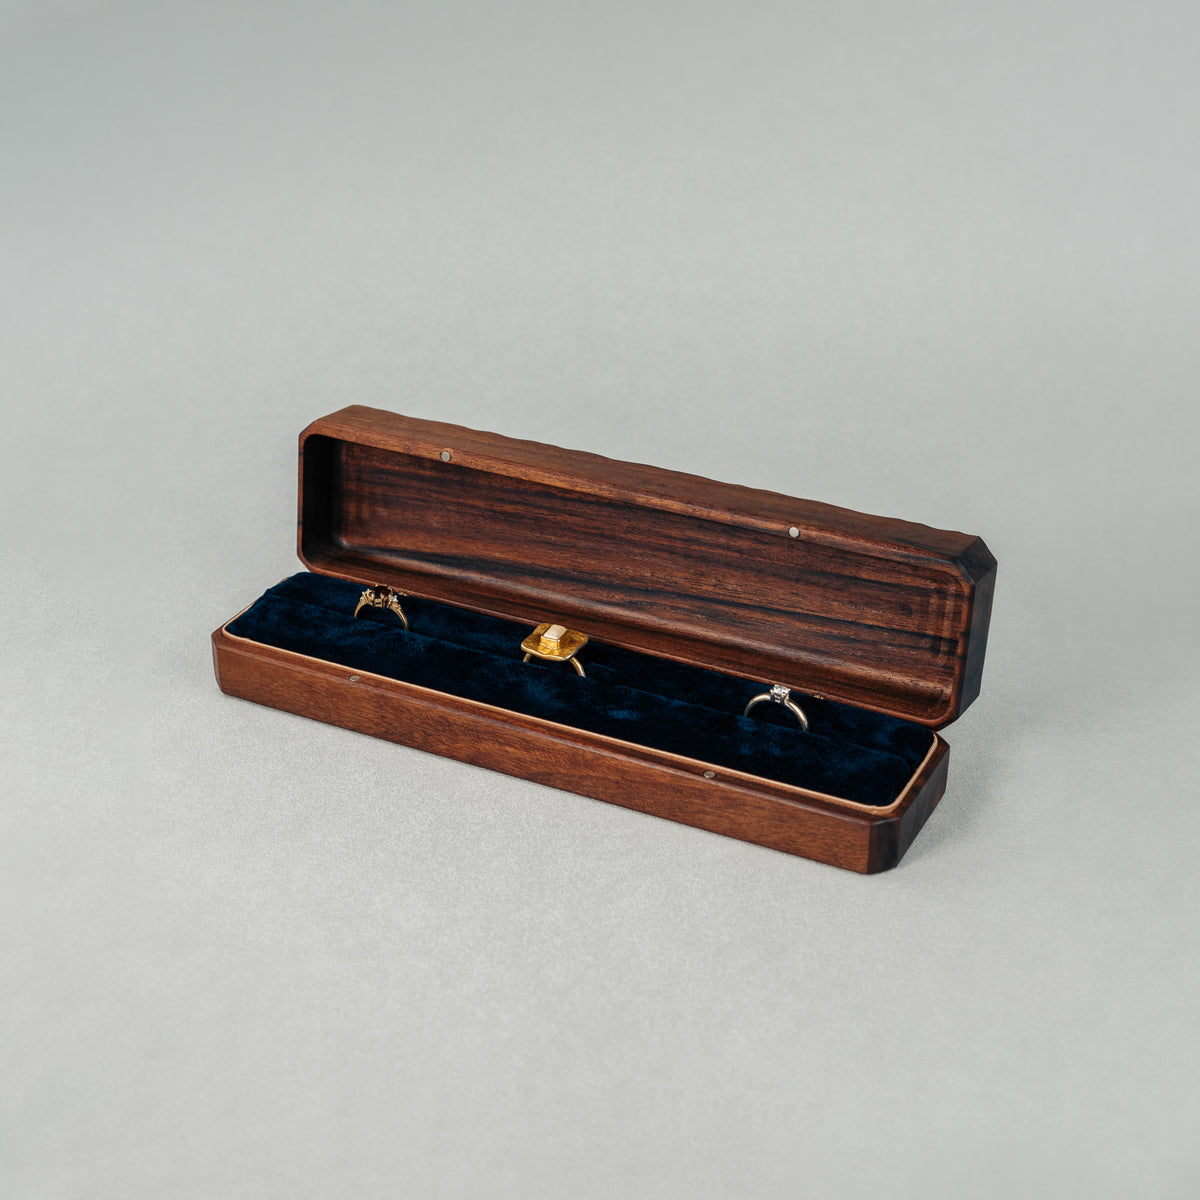 Open Jewellery Box made of walnut wood with three rings placed inside.